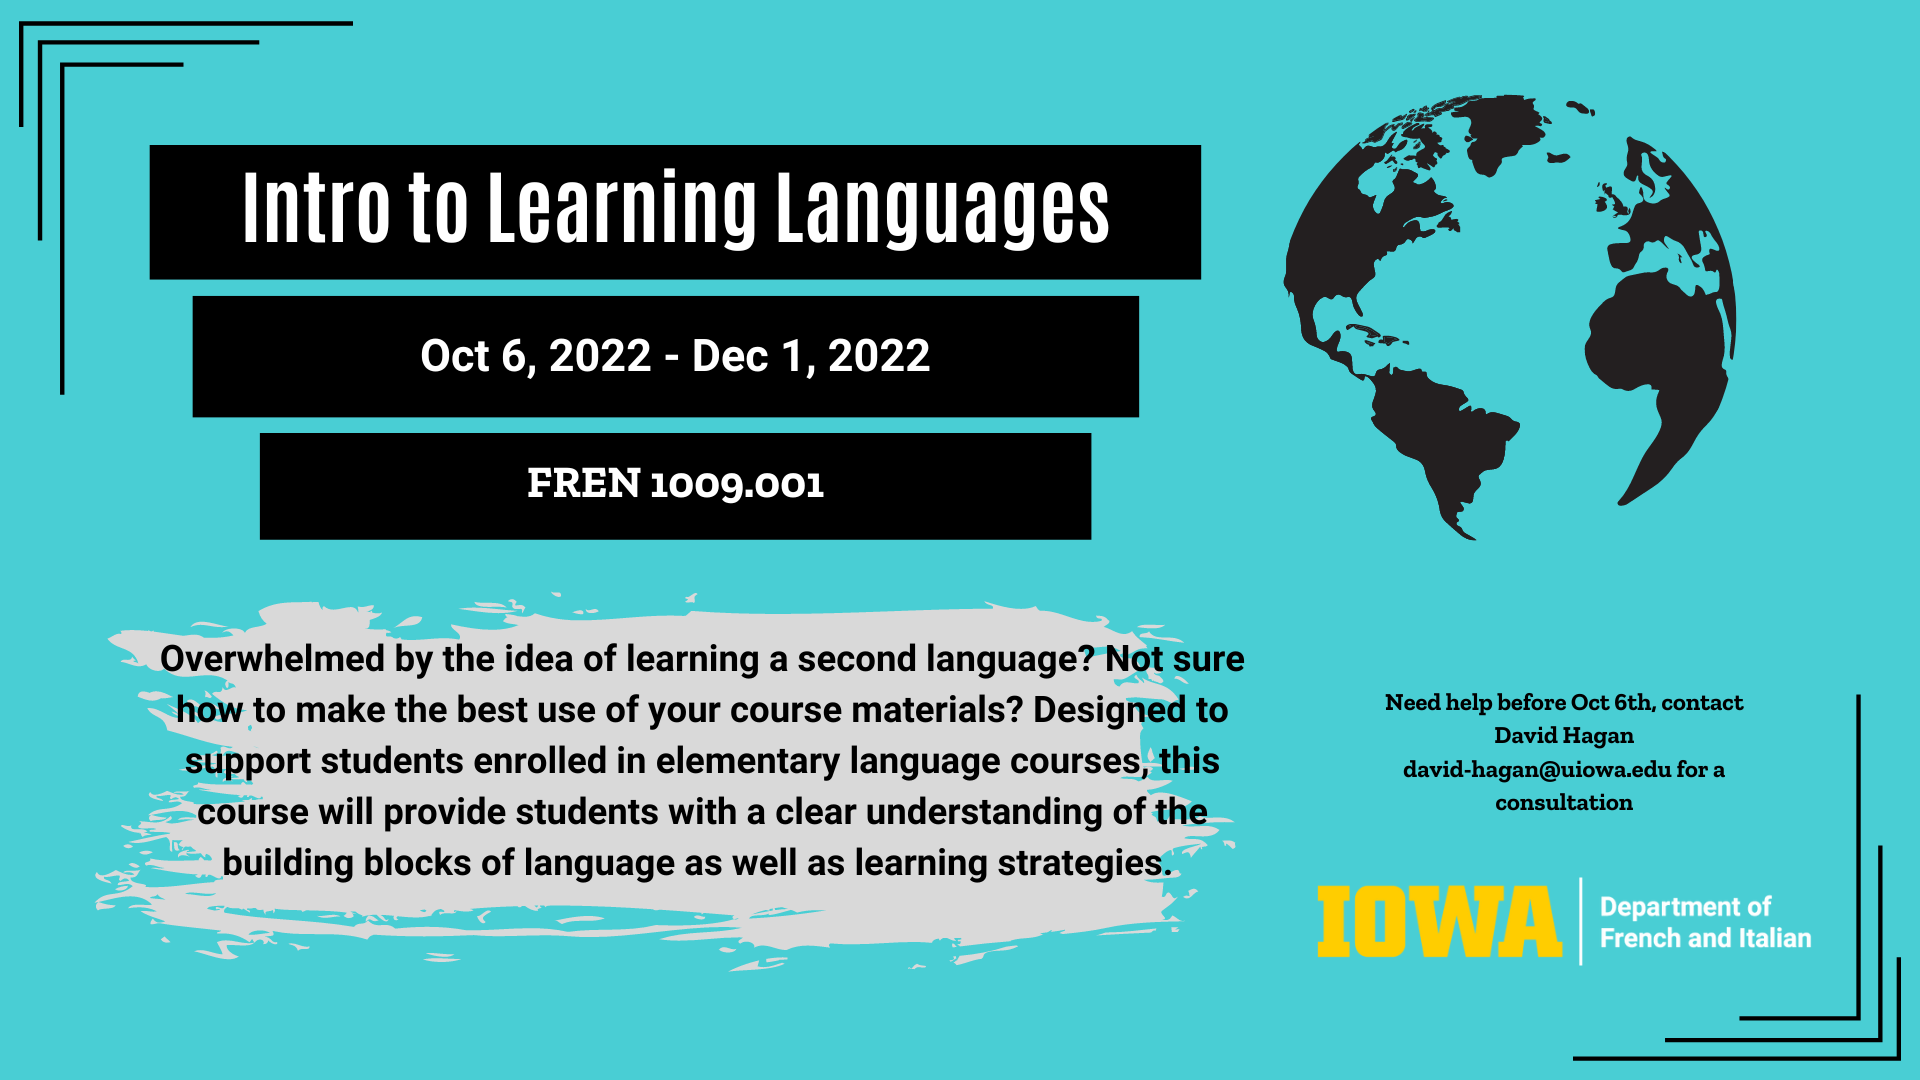 Intro to Learning Languages. October 6, 2022 - December 1, 2022. FREN: 1009:001. Overwhelmed by the idea of learning a second language? Not sure how to make the best use of your course materials? Designed to support students enrolled in elementary language courses, this course will provide students with a clear understanding of the building blocks of language as well as learning strategies. Need help before October 6, contact David Hagan at david-hagan@uiowa.edu for a consultation. Iowa Department of French and Italian. 